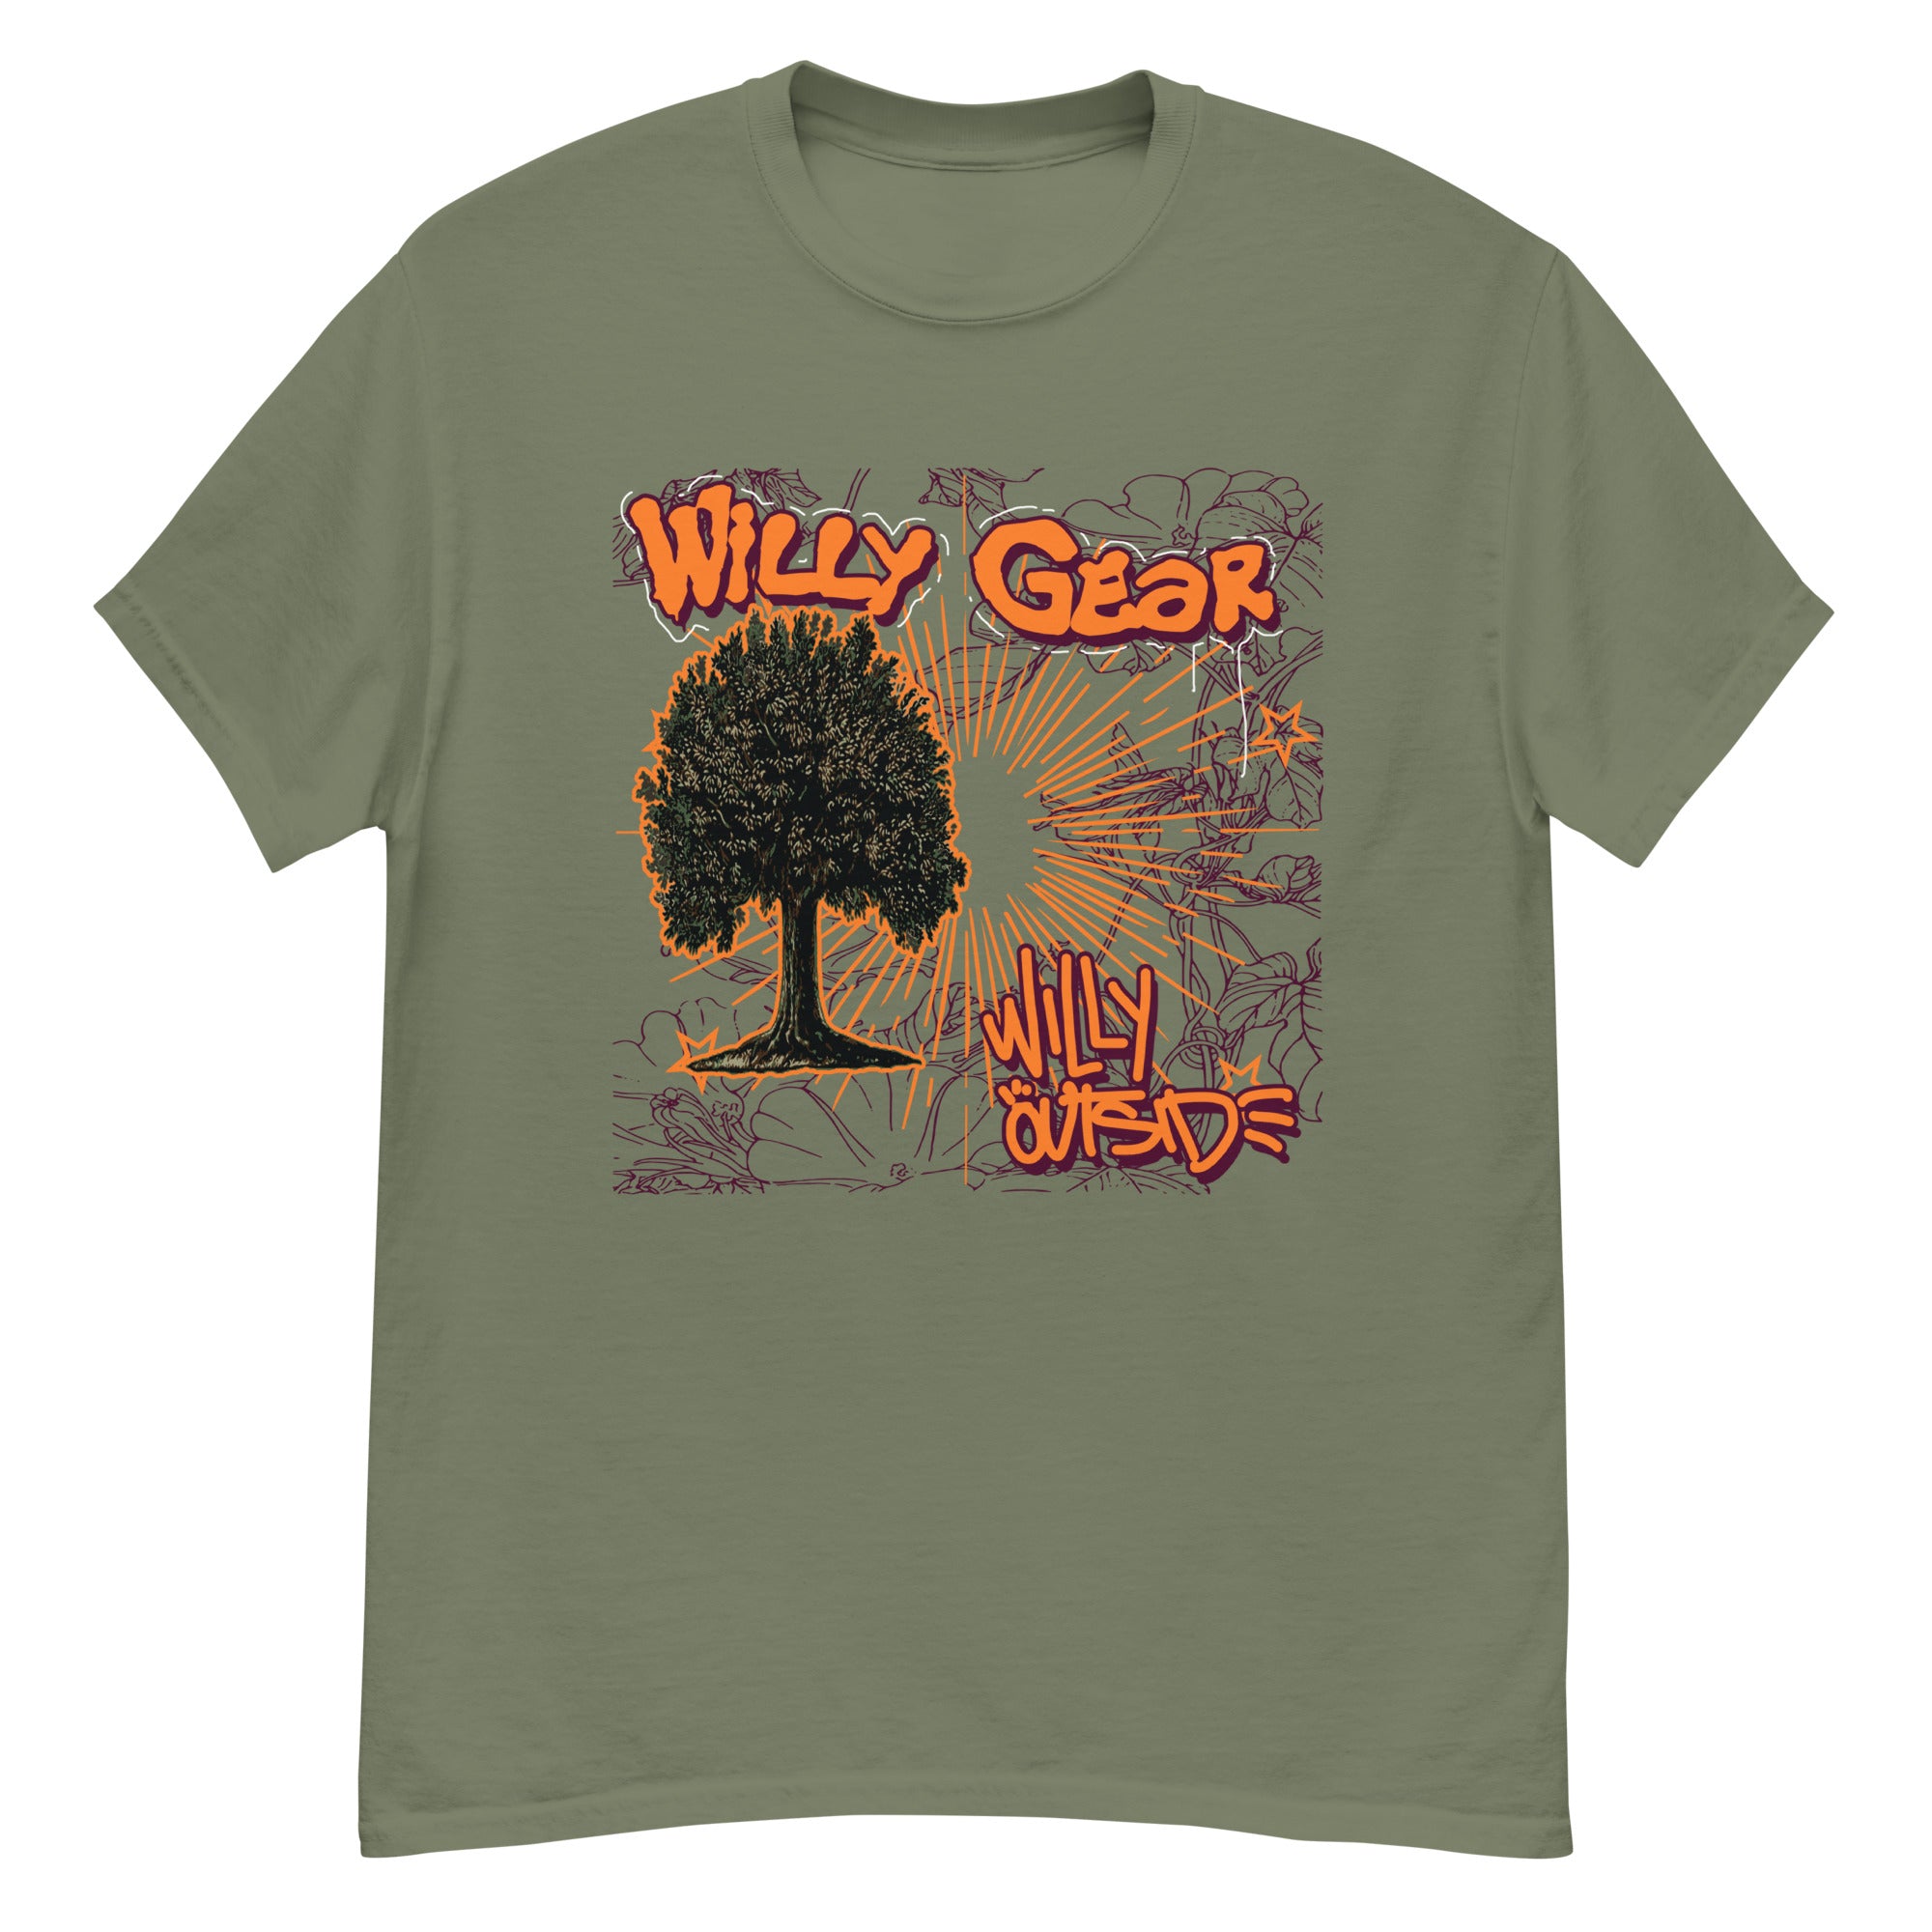 LIMITED "Willy Outside" classic tee